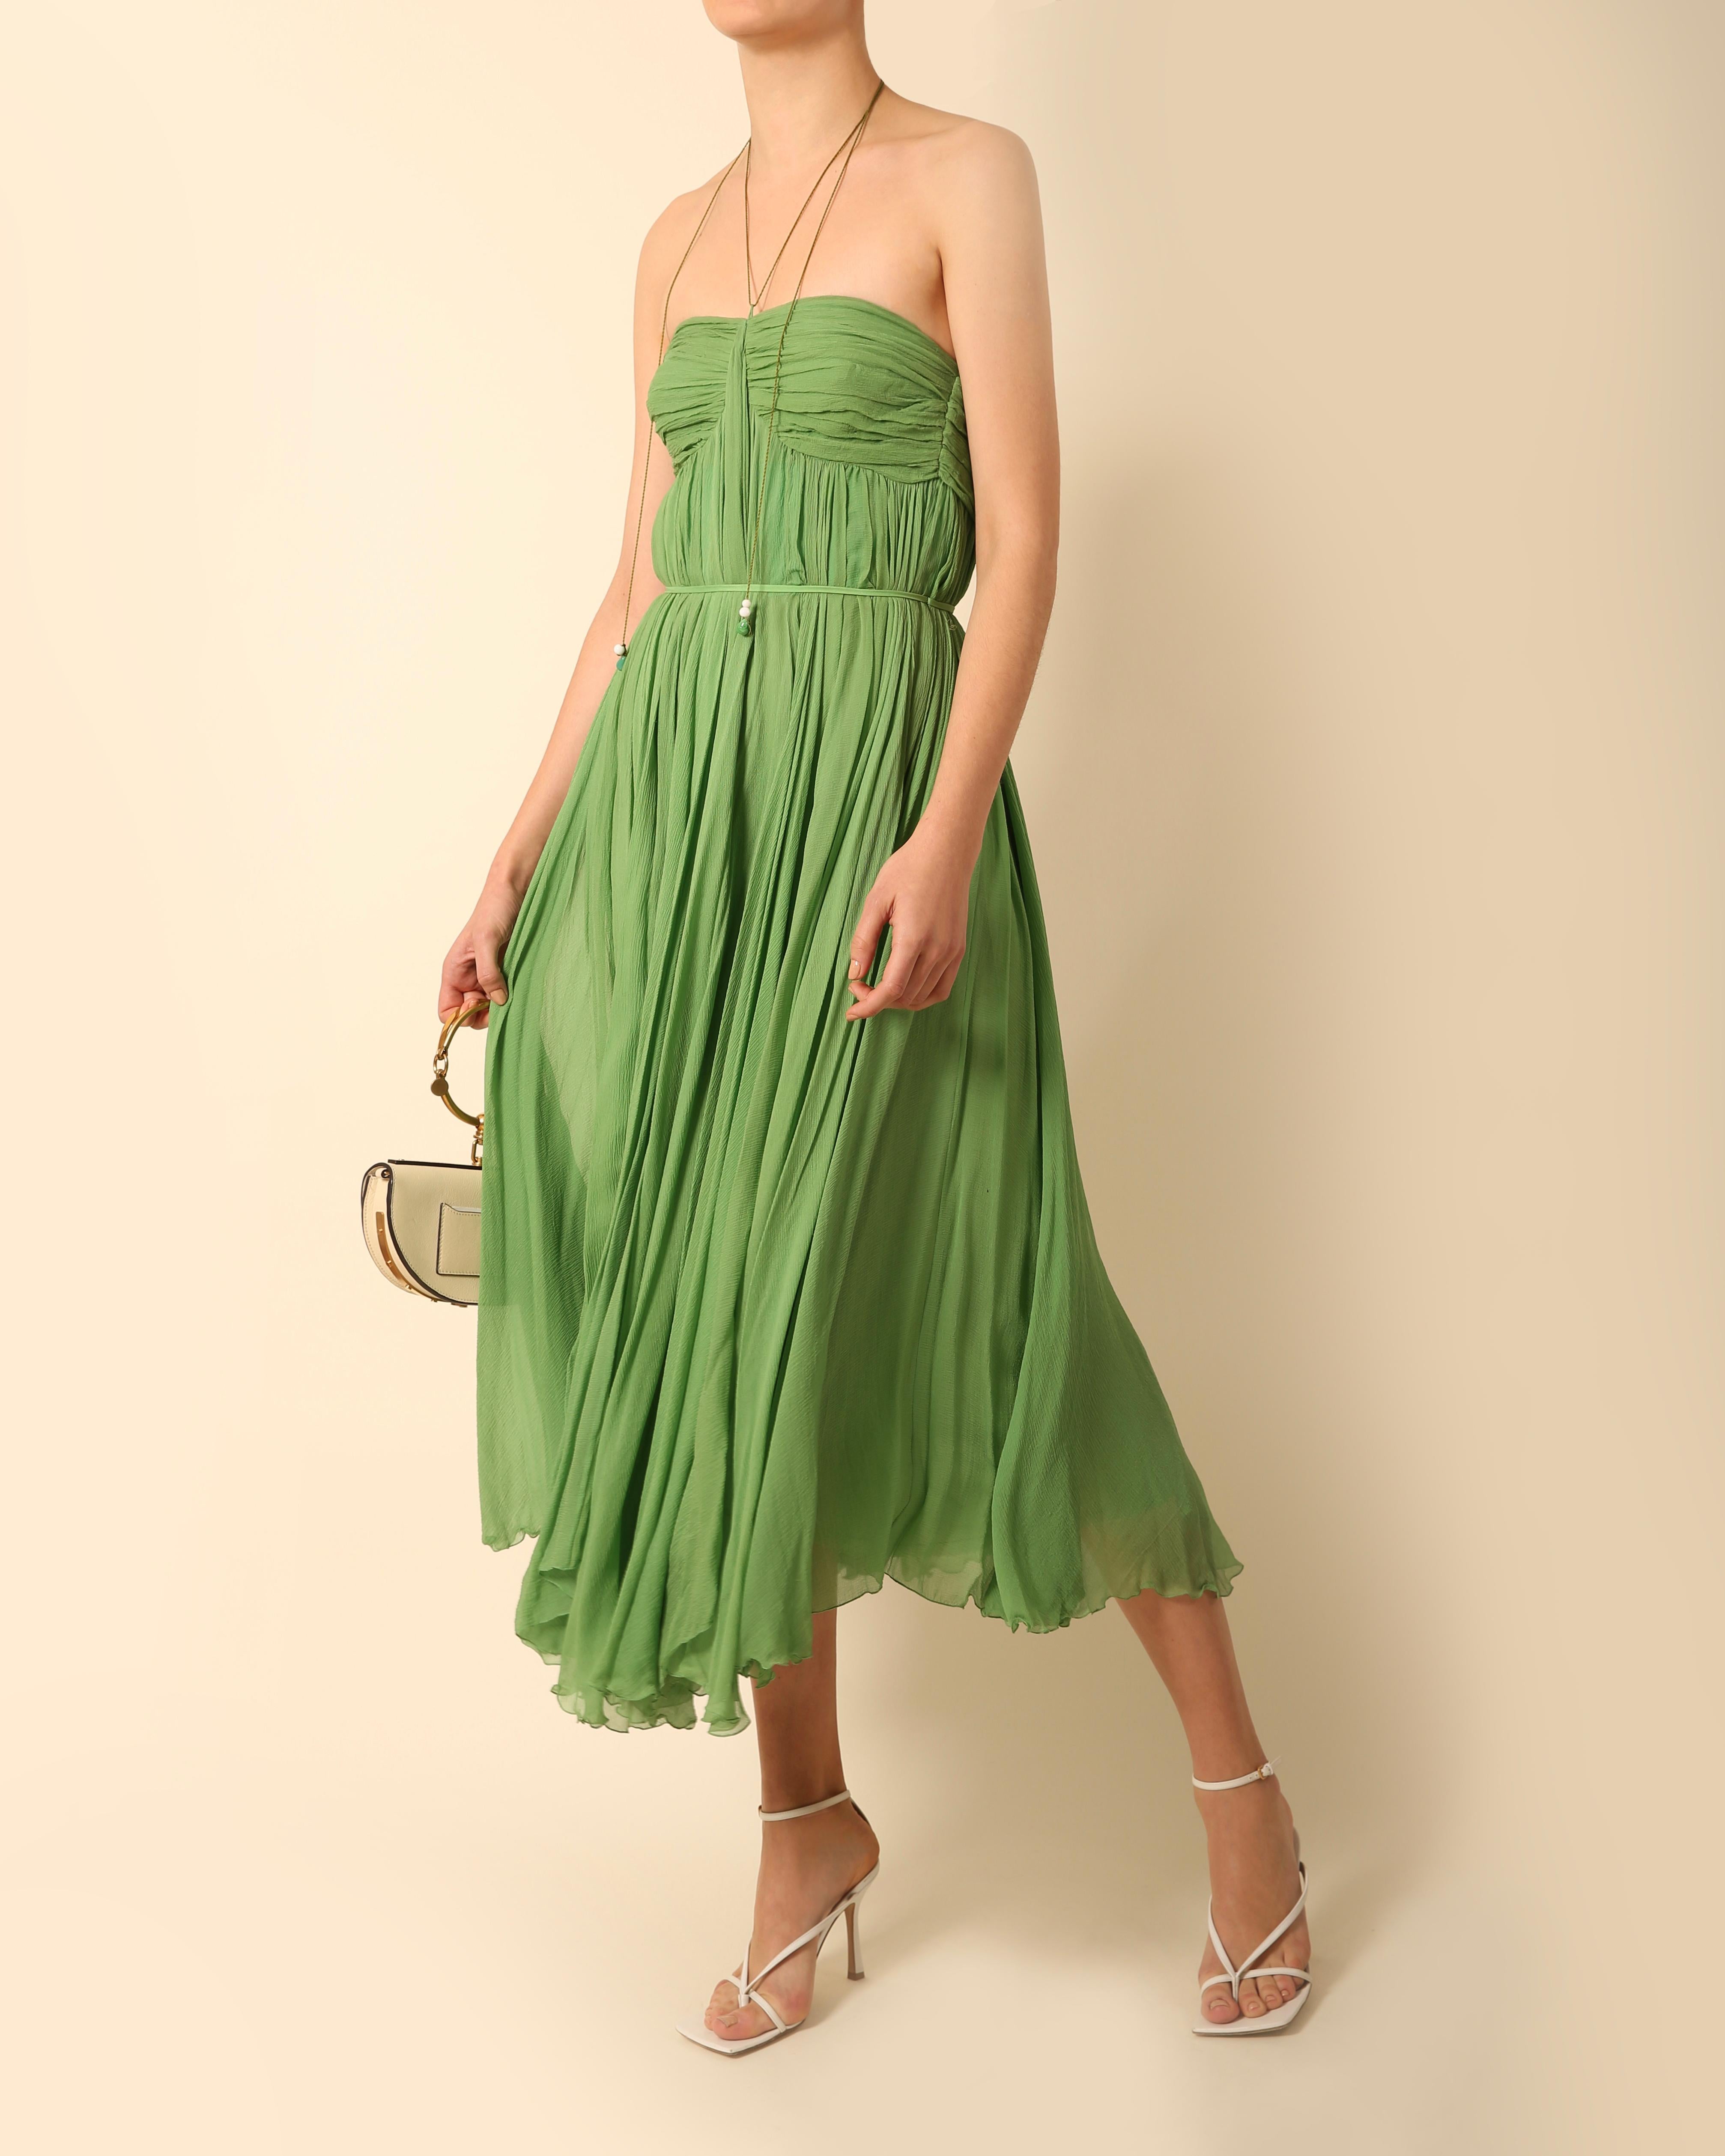 Chloe S04 strapless plisse green silk chiffon layered bustier midi length dress  In Excellent Condition For Sale In Paris, FR